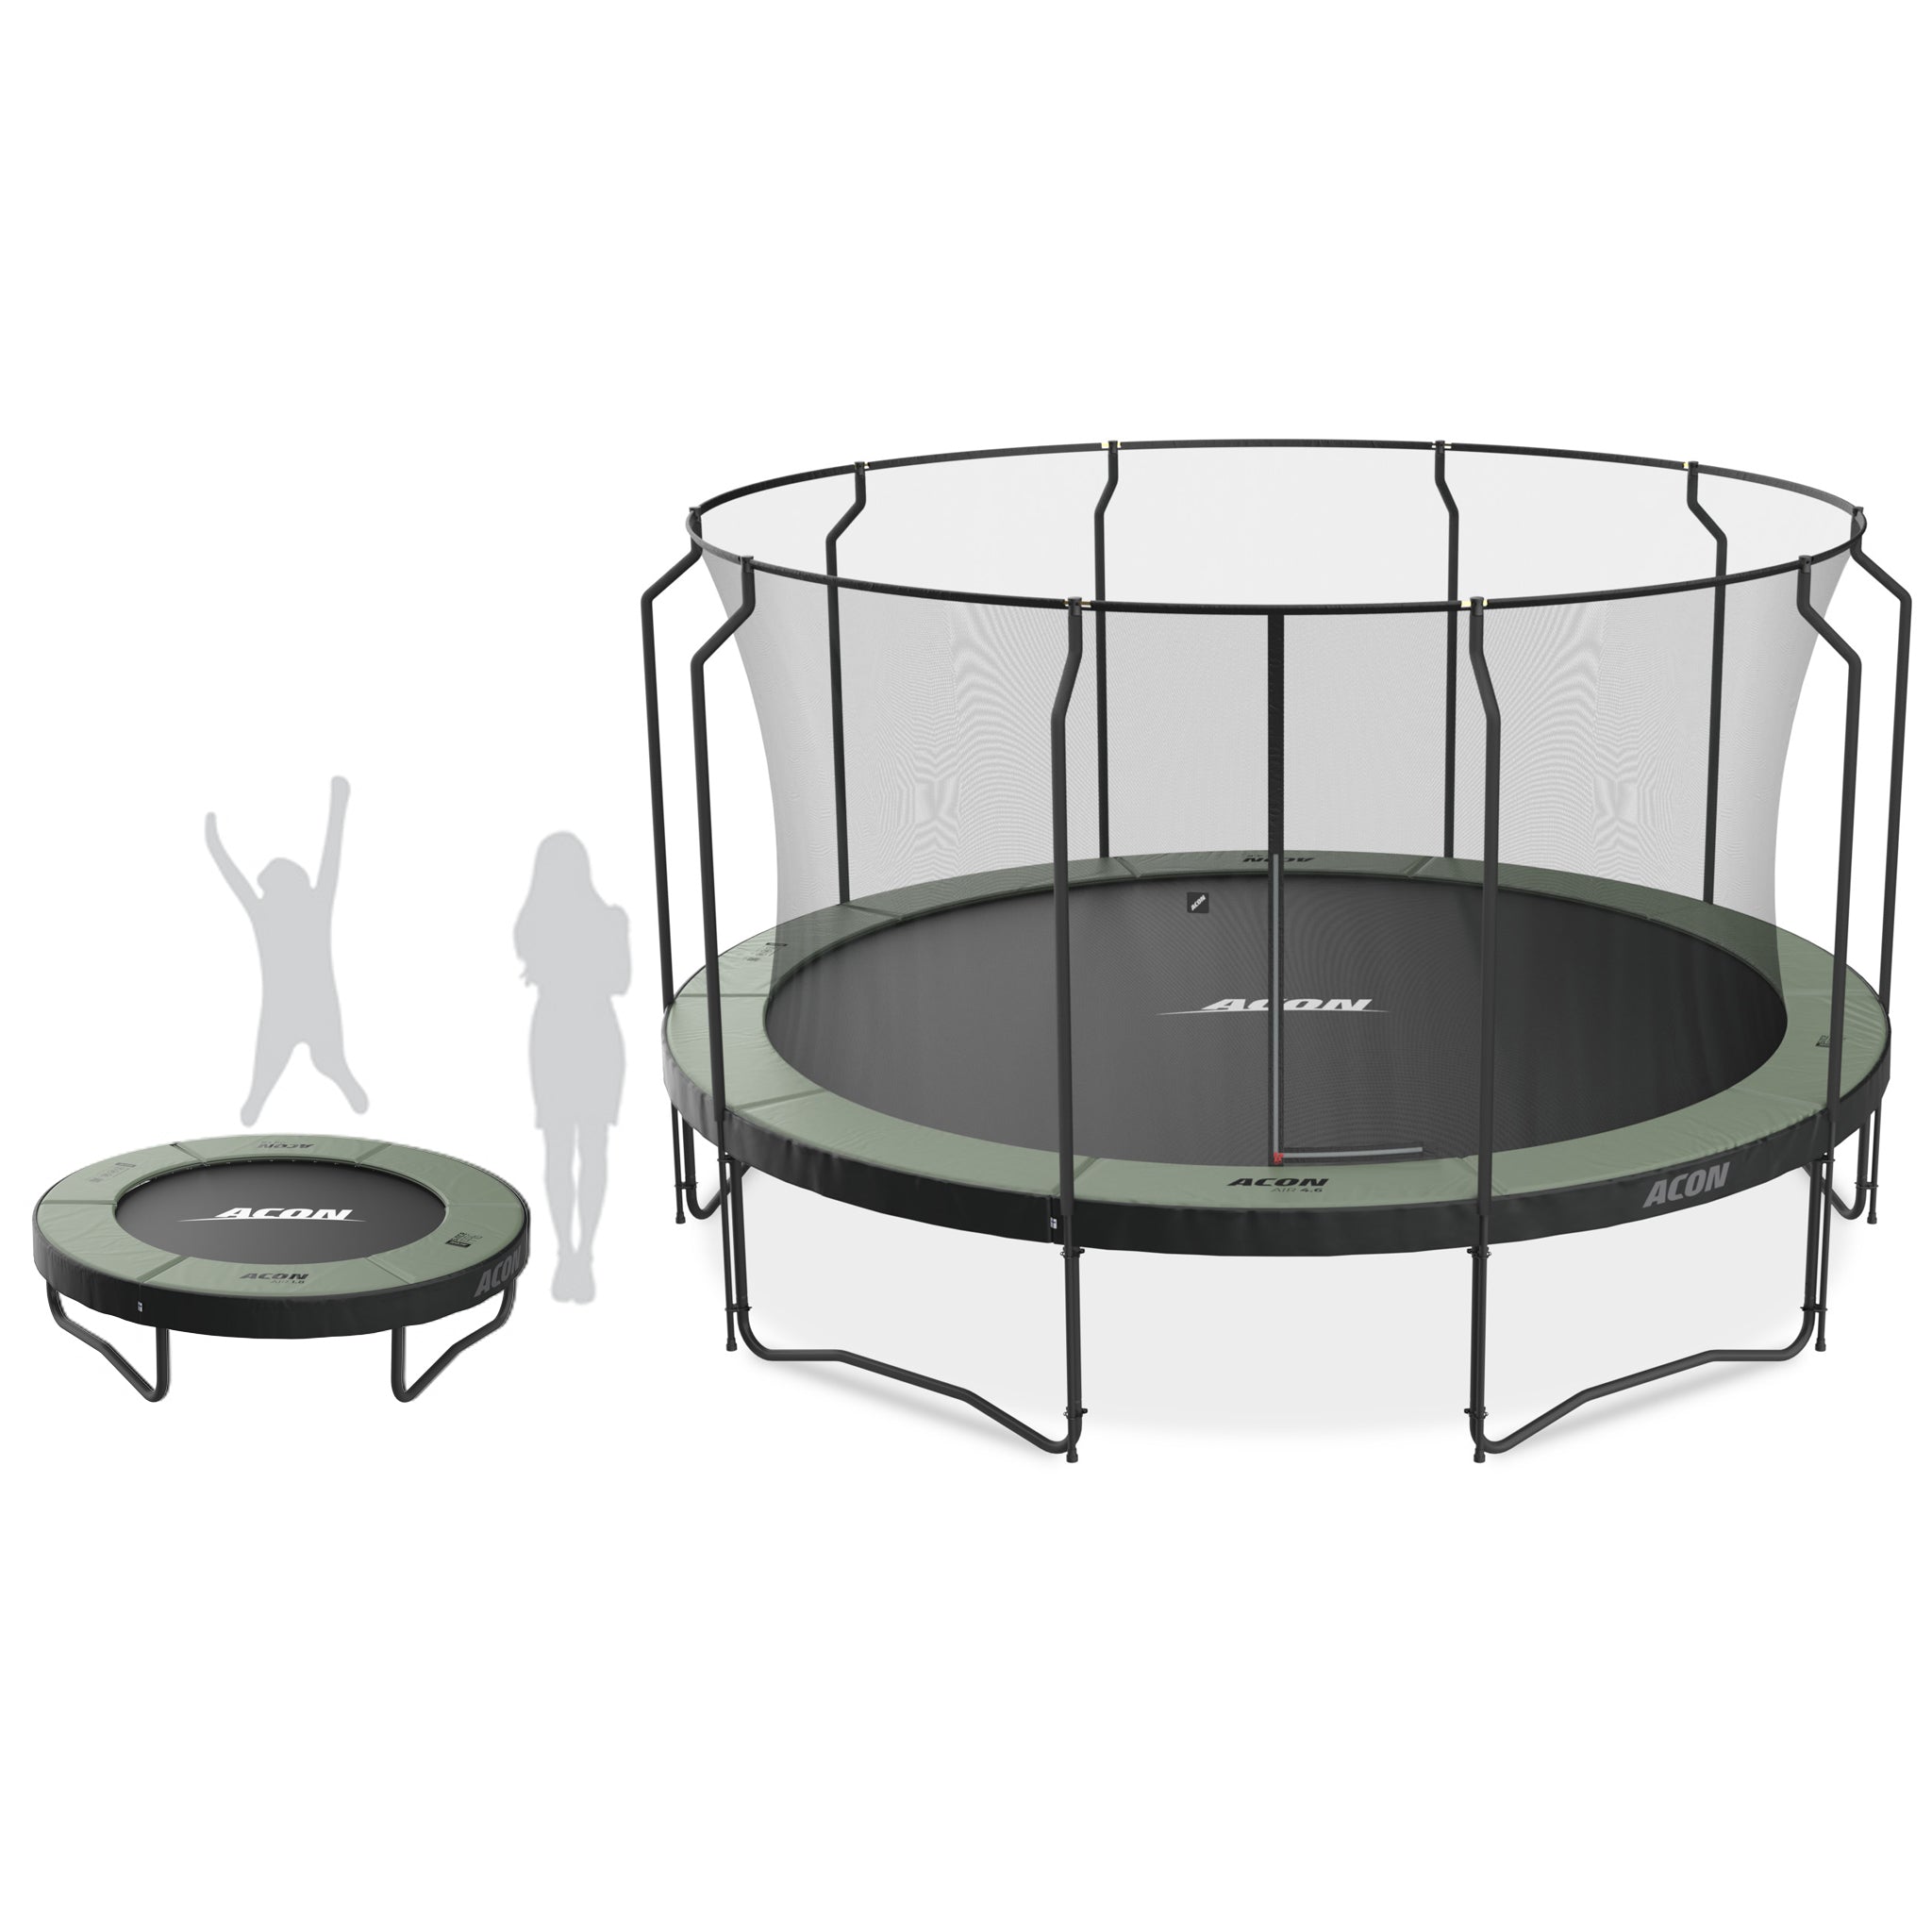 A small and a big acon trampoline with human scale picture